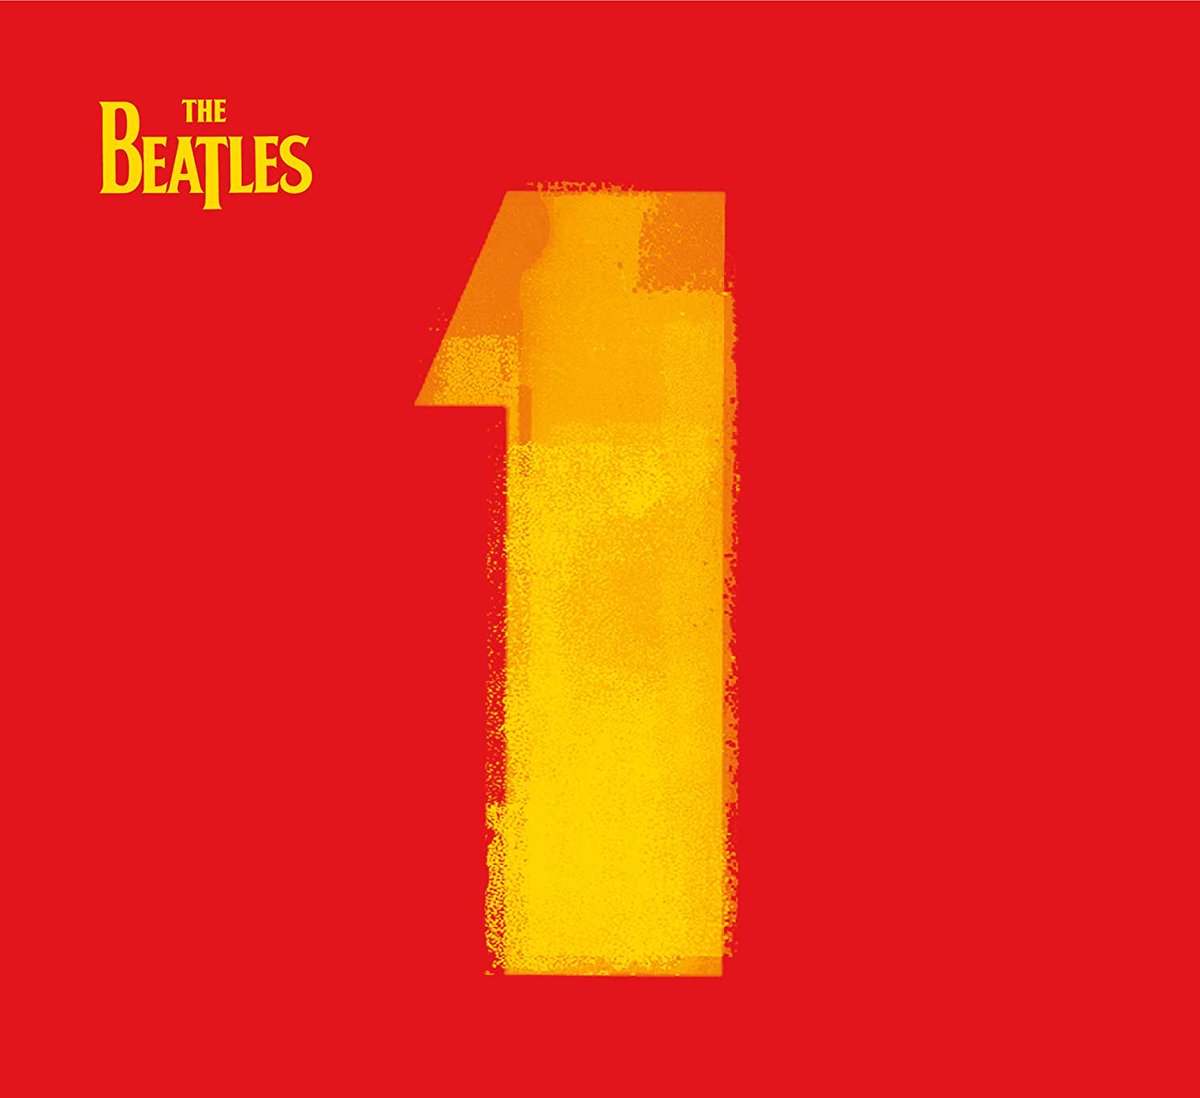 It is quite clear the number is huge due to the Beatles’ music spanning from generations to generations, with new compilation releases and albums topping charts almost half a century after its original release (ie: Abbey Road).